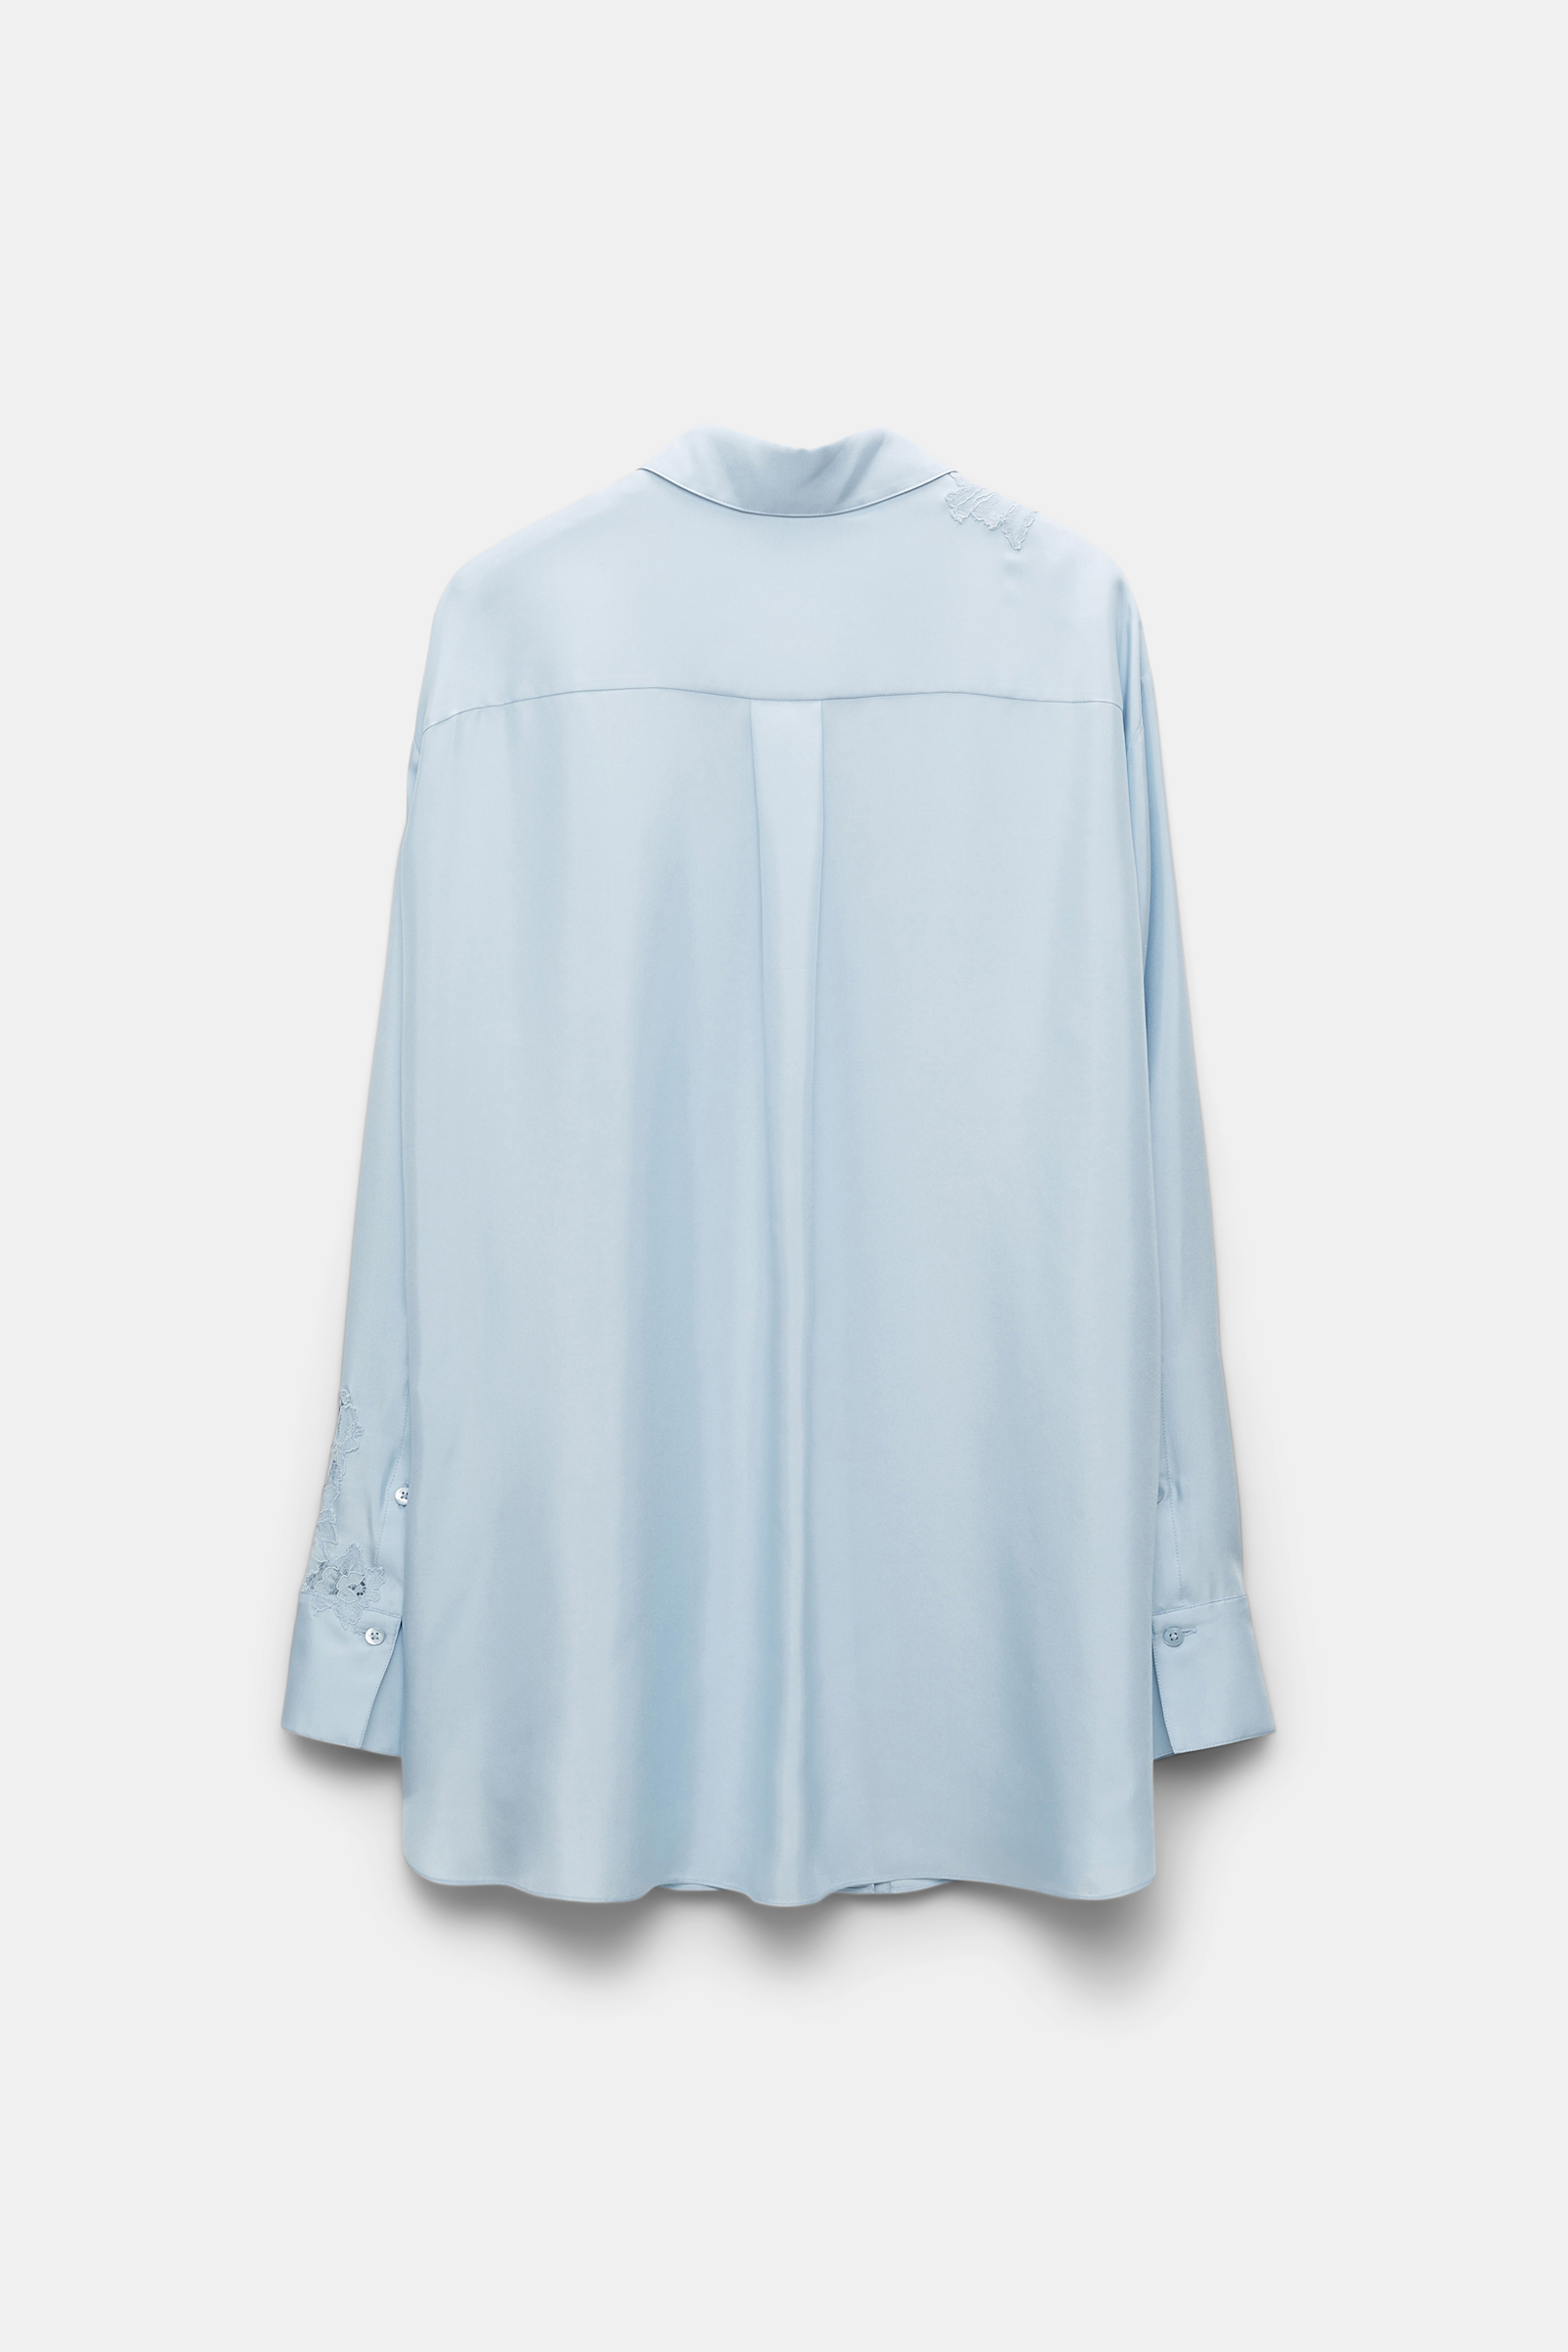 Dorothee Schumacher Silk twill shirt with asymmetric lace inserts on one shoulder and sleeve soft blue